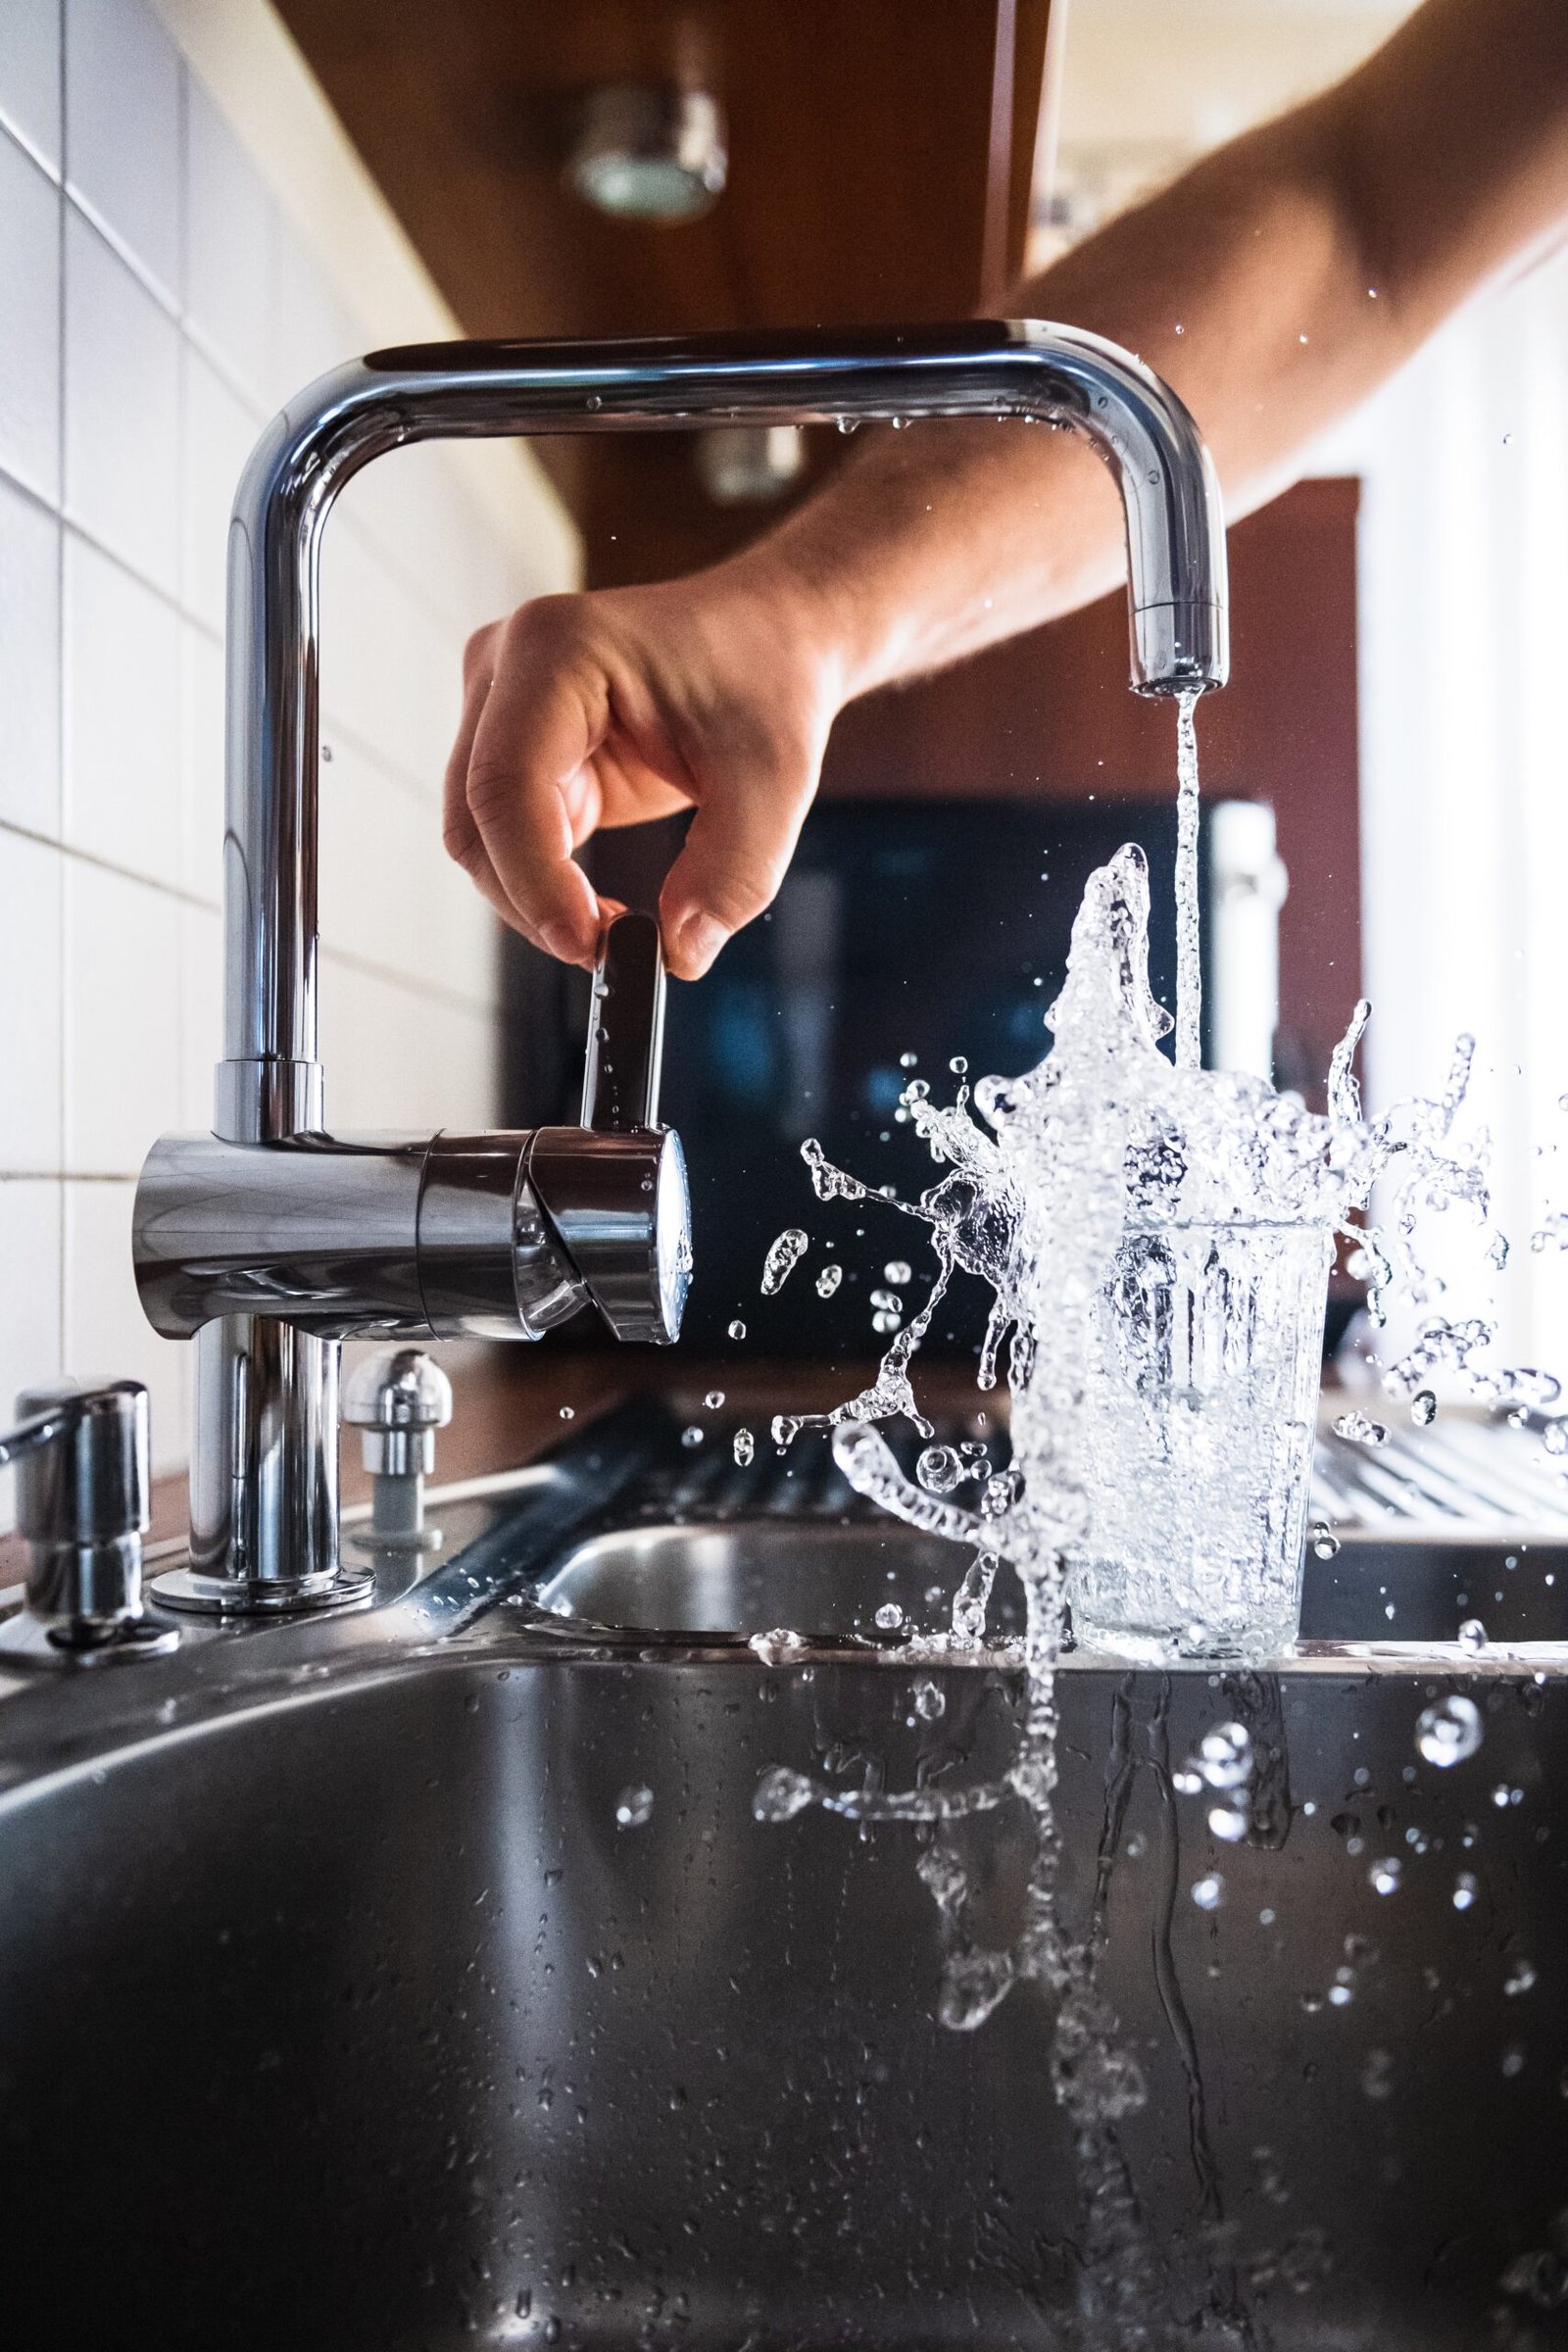 Top 10 Common Plumbing Issues and How to Fix Them